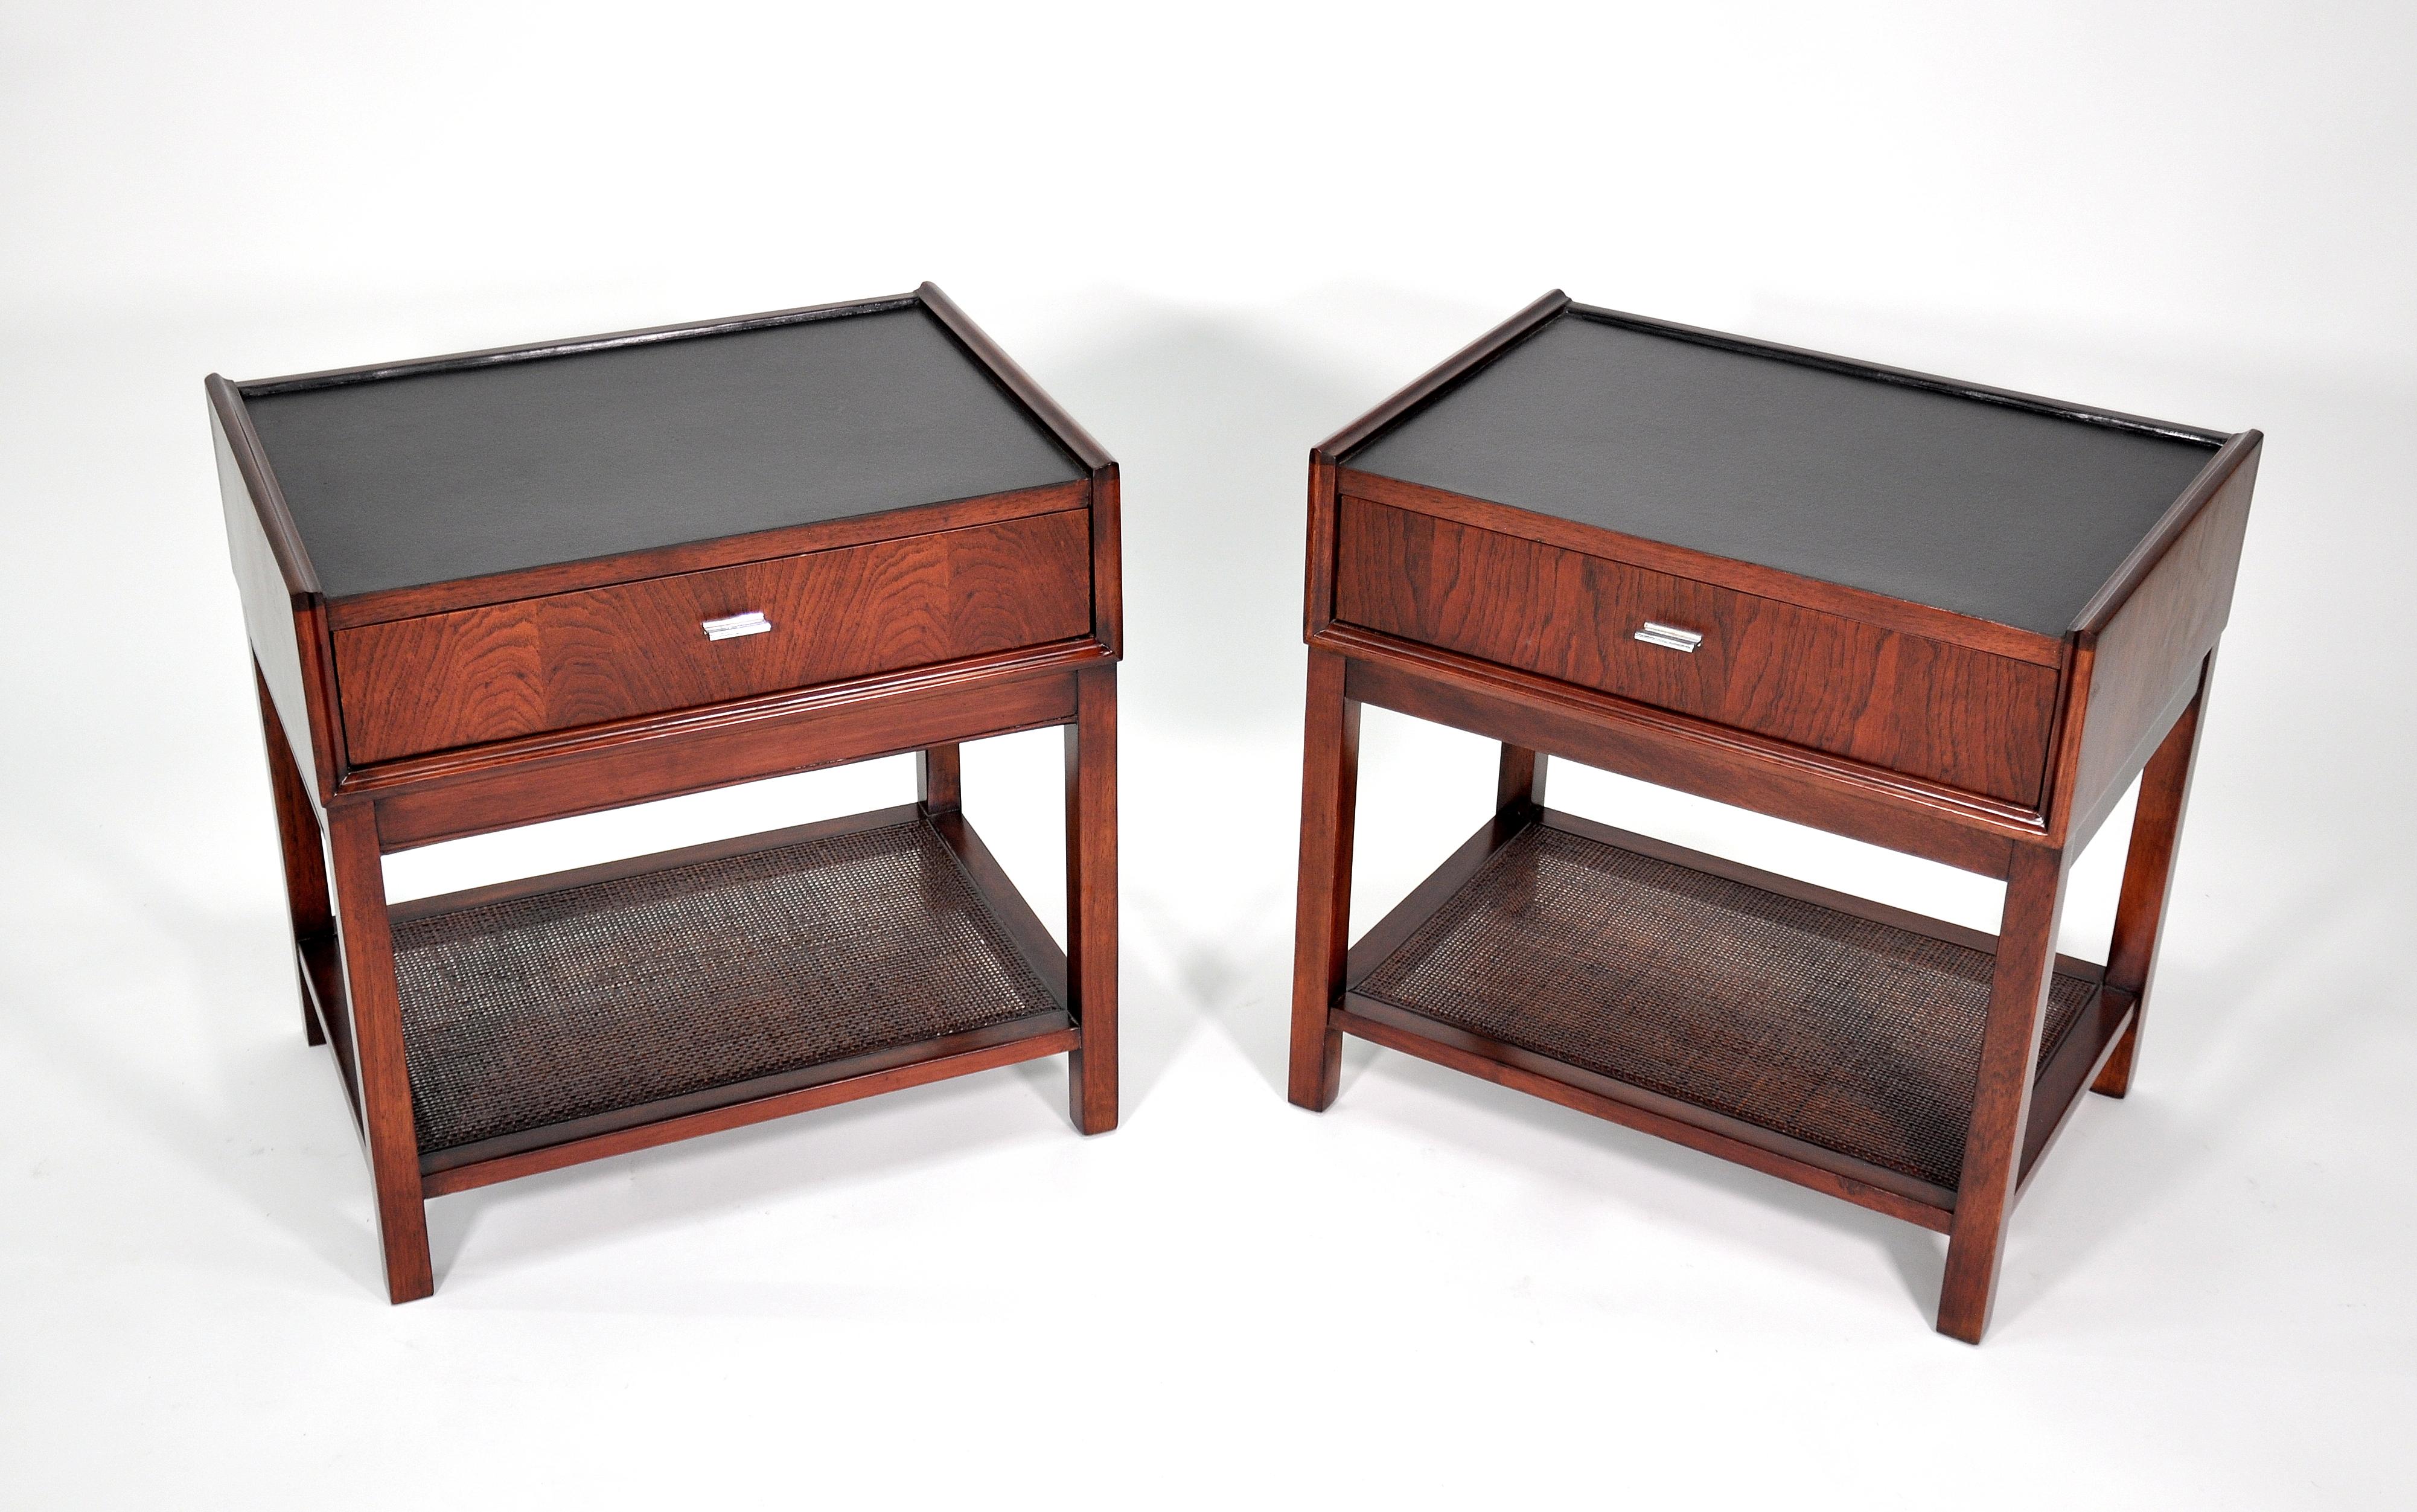 Pair of Rosewood, Cane and Black Leather Nightstands or Side Tables by Founders 2